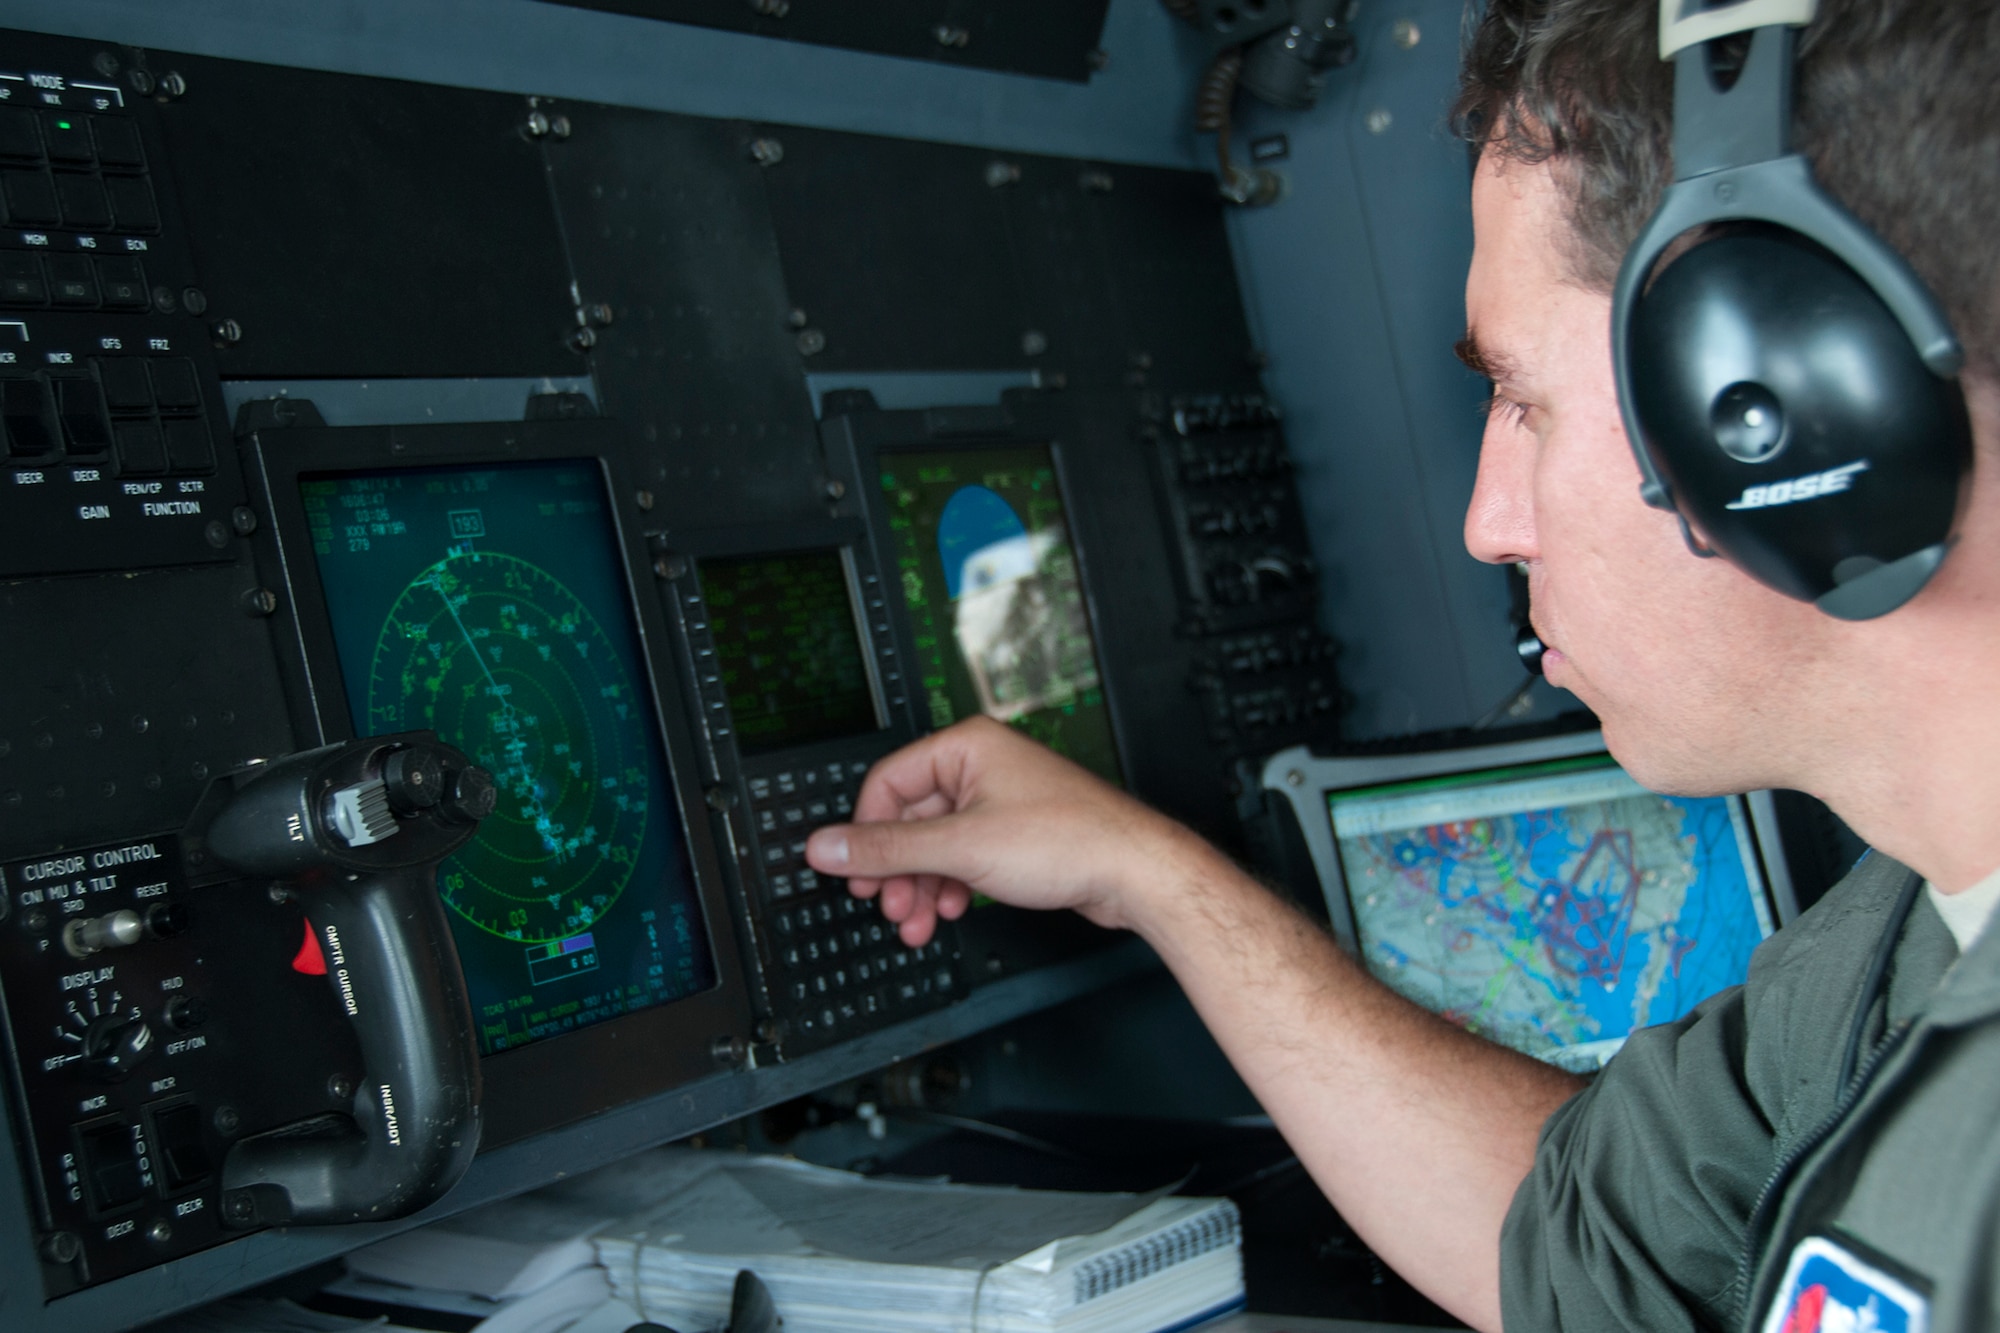 Major John Gharbi, 53d Weather Reconnaissance Squadron “Hurricane Hunters” navigator, checks the weather during a flight over Maryland June 28, 2016. As part of the 100th anniversary of air power in the U.S. military, members of the media were invited to fly with the Hurricane Hunters and learn about their weather surveillance mission. With ten deployable C-130s, the unit has the only routine aerial weather reconnaissance mission in the world. (U.S. Air Force photo/Staff Sgt. Kat Justen)